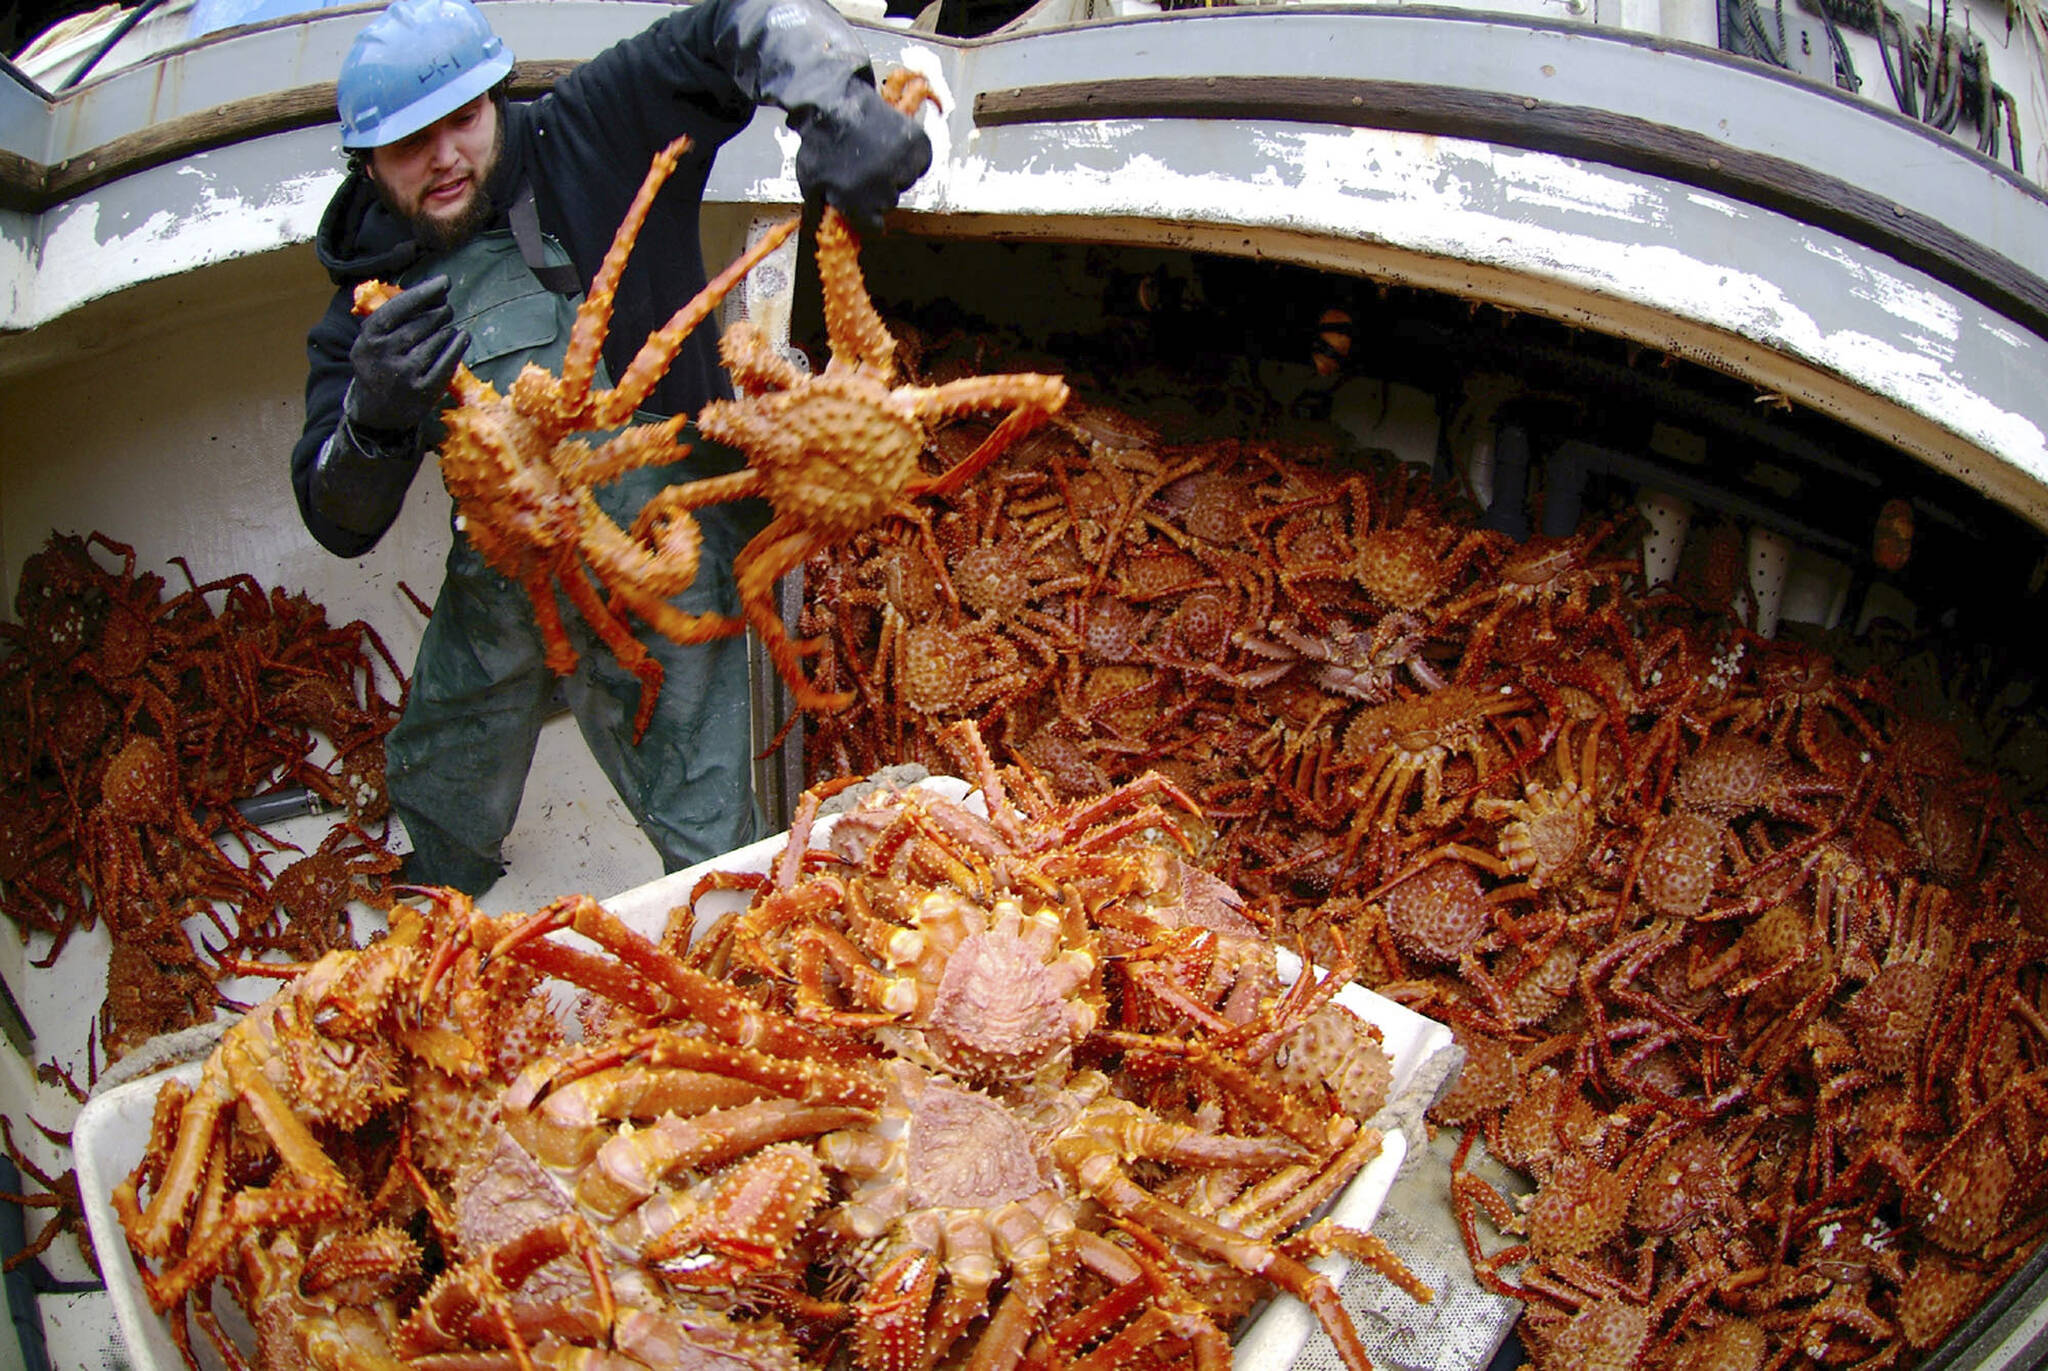 Steve Waddle places golden king crab into a tote in the hold of the F/V Angjenl while unloading at Petersburg, Alaska on March 1, 2007. The U.S. Department of Commerce's disaster declaration for salmon and crab fisheries in Washington and Alaska opens the door for financial relief as part of an omnibus spending bill being negotiated by U.S. lawmakers. The declaration Friday, Dec. 16, 2022, covers Bristol Bay king crab harvests suspended for two years, and the snow crab harvest that will be canceled for the first time in 2023. (AP Photo / Klas Stolpe)